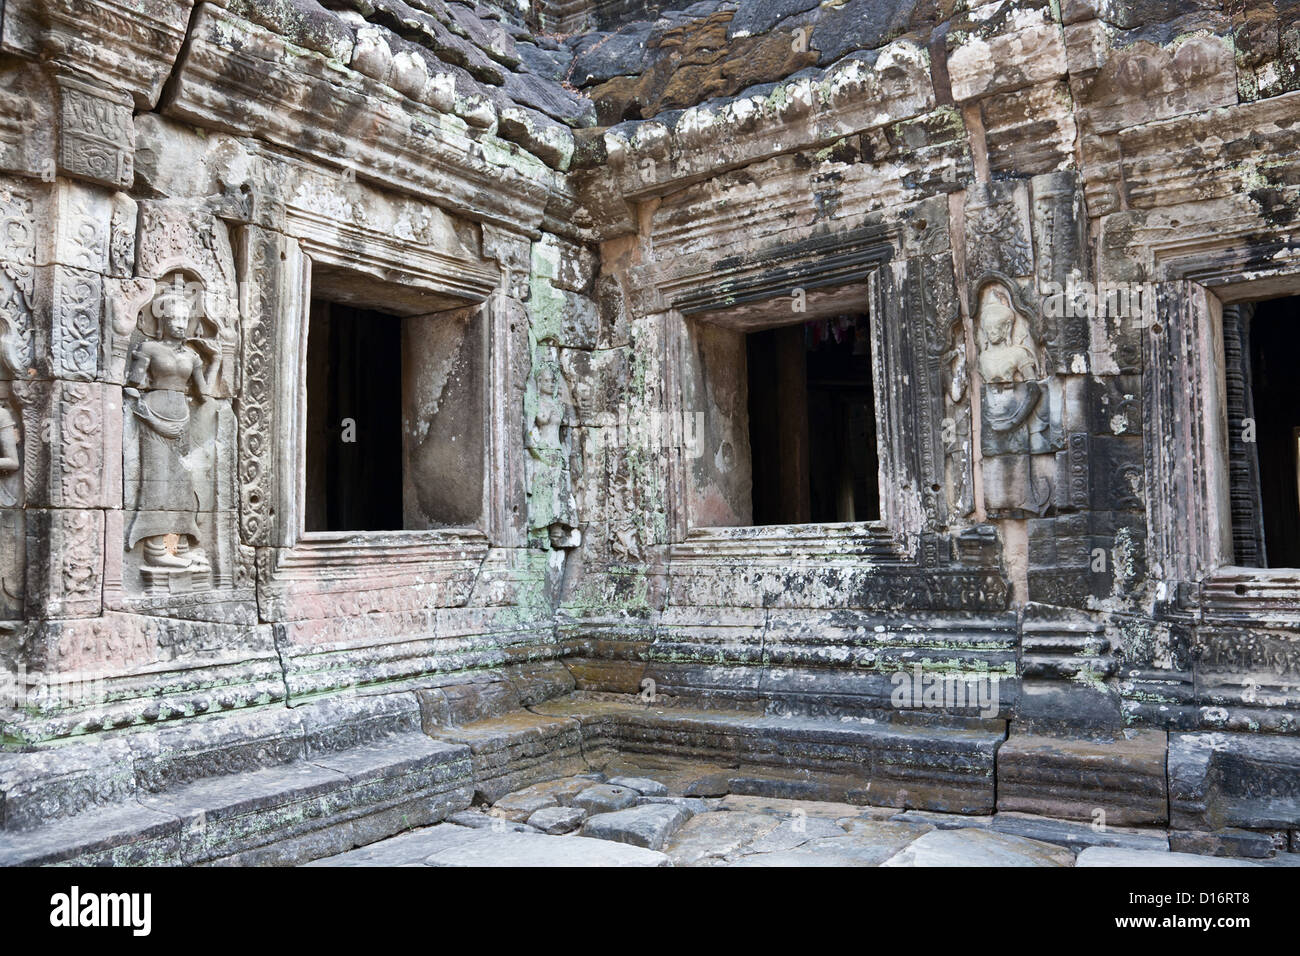 Almost ruined temple with buddha carving on the wall, Angkor wat, Cambodia Stock Photo